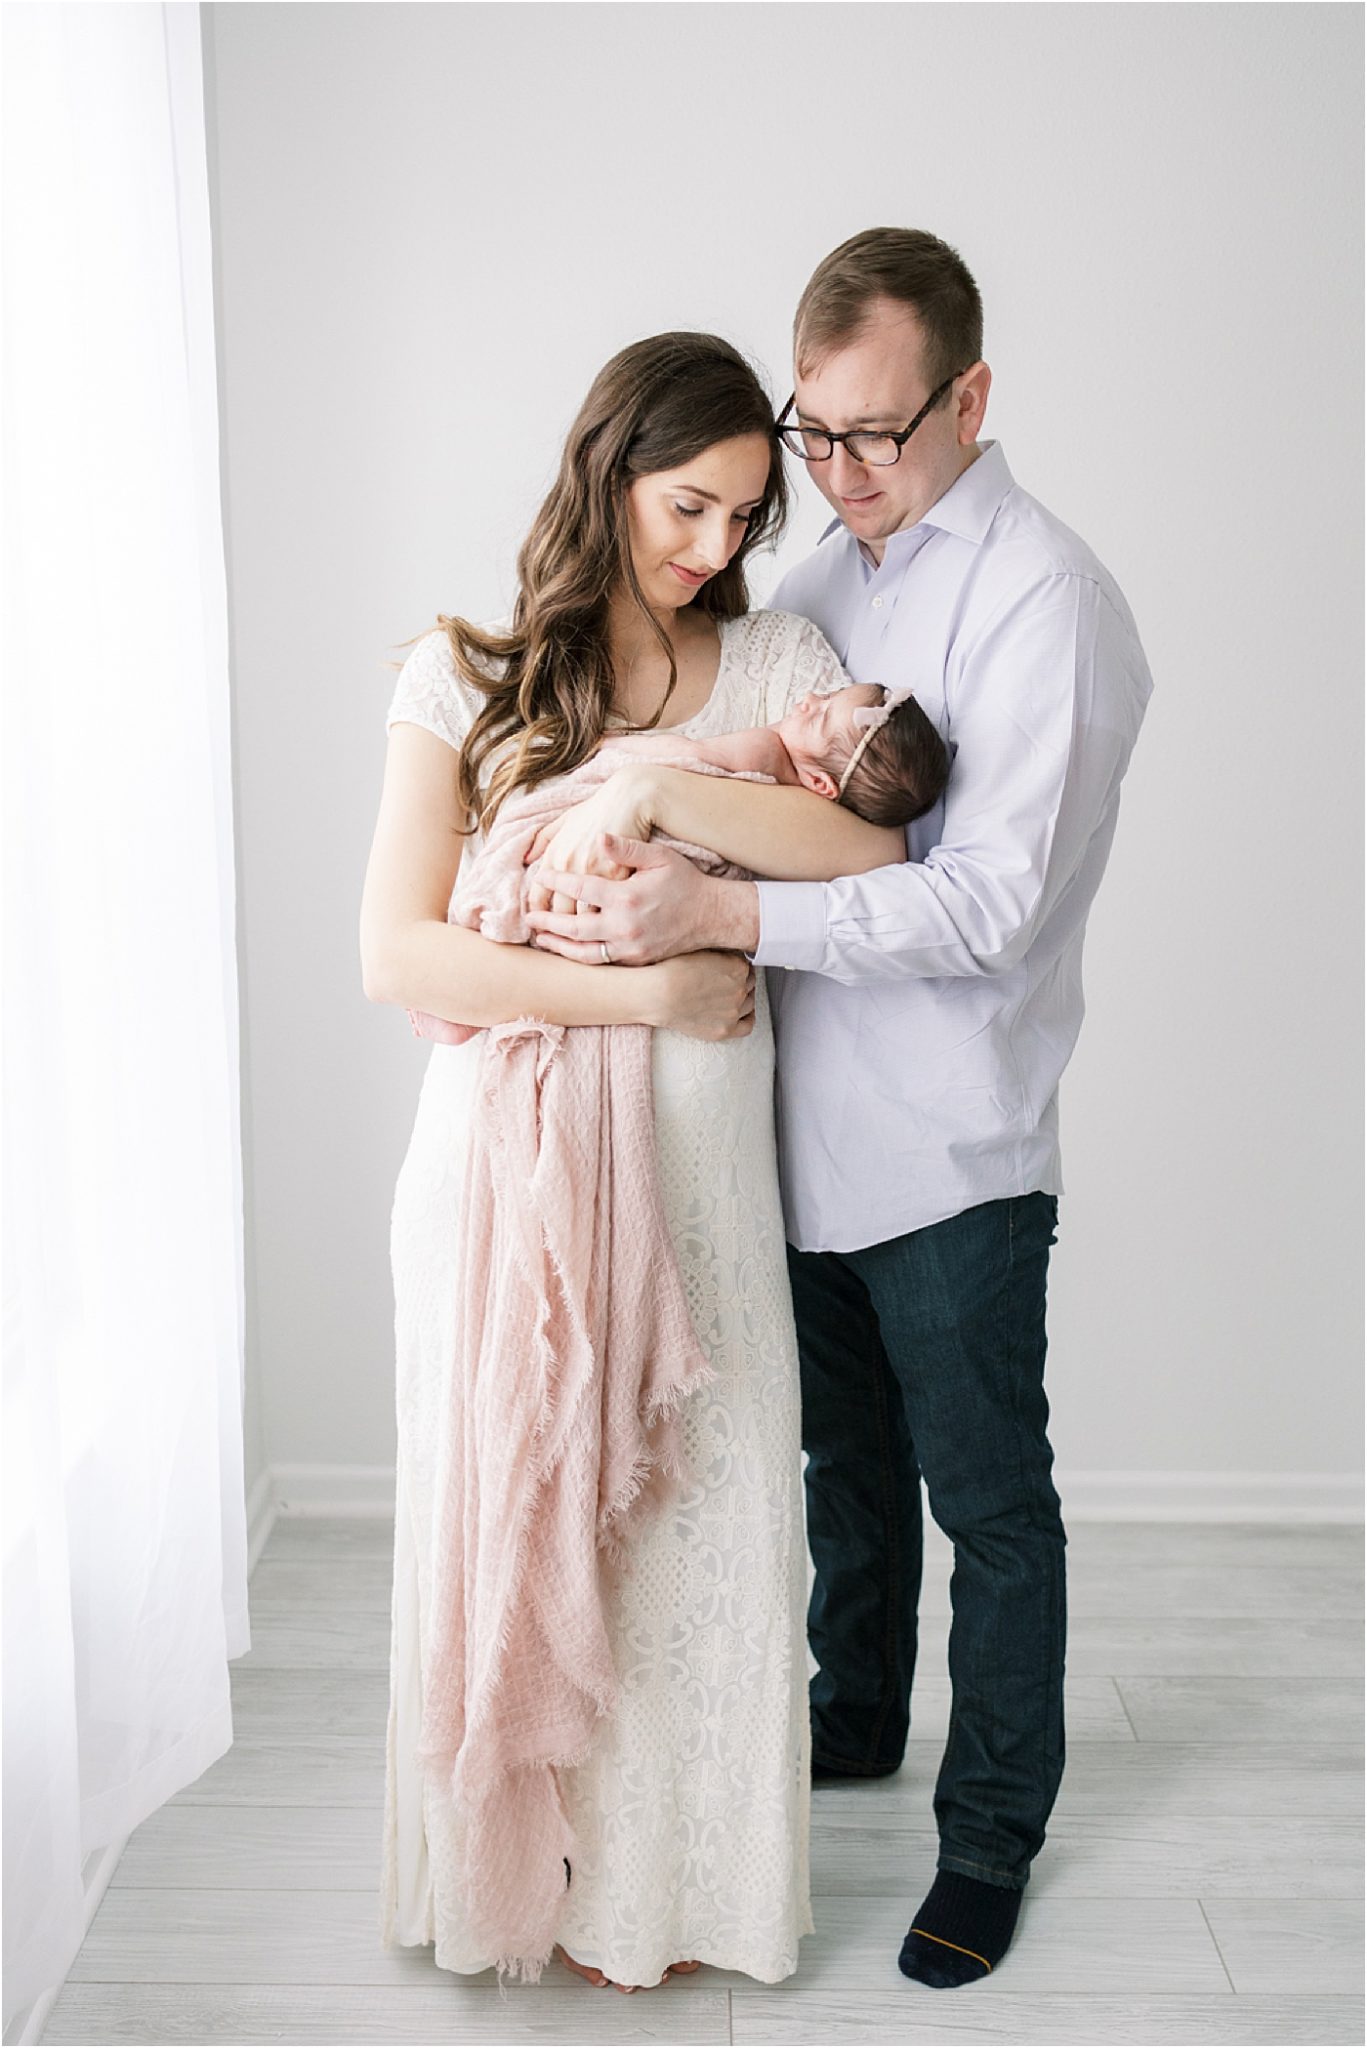 Mom and Dad adoring their brand new baby girl during her newborn photoshoot in a photography studio in Fishers Indiana. Photo by Lindsay Konopa Photography.